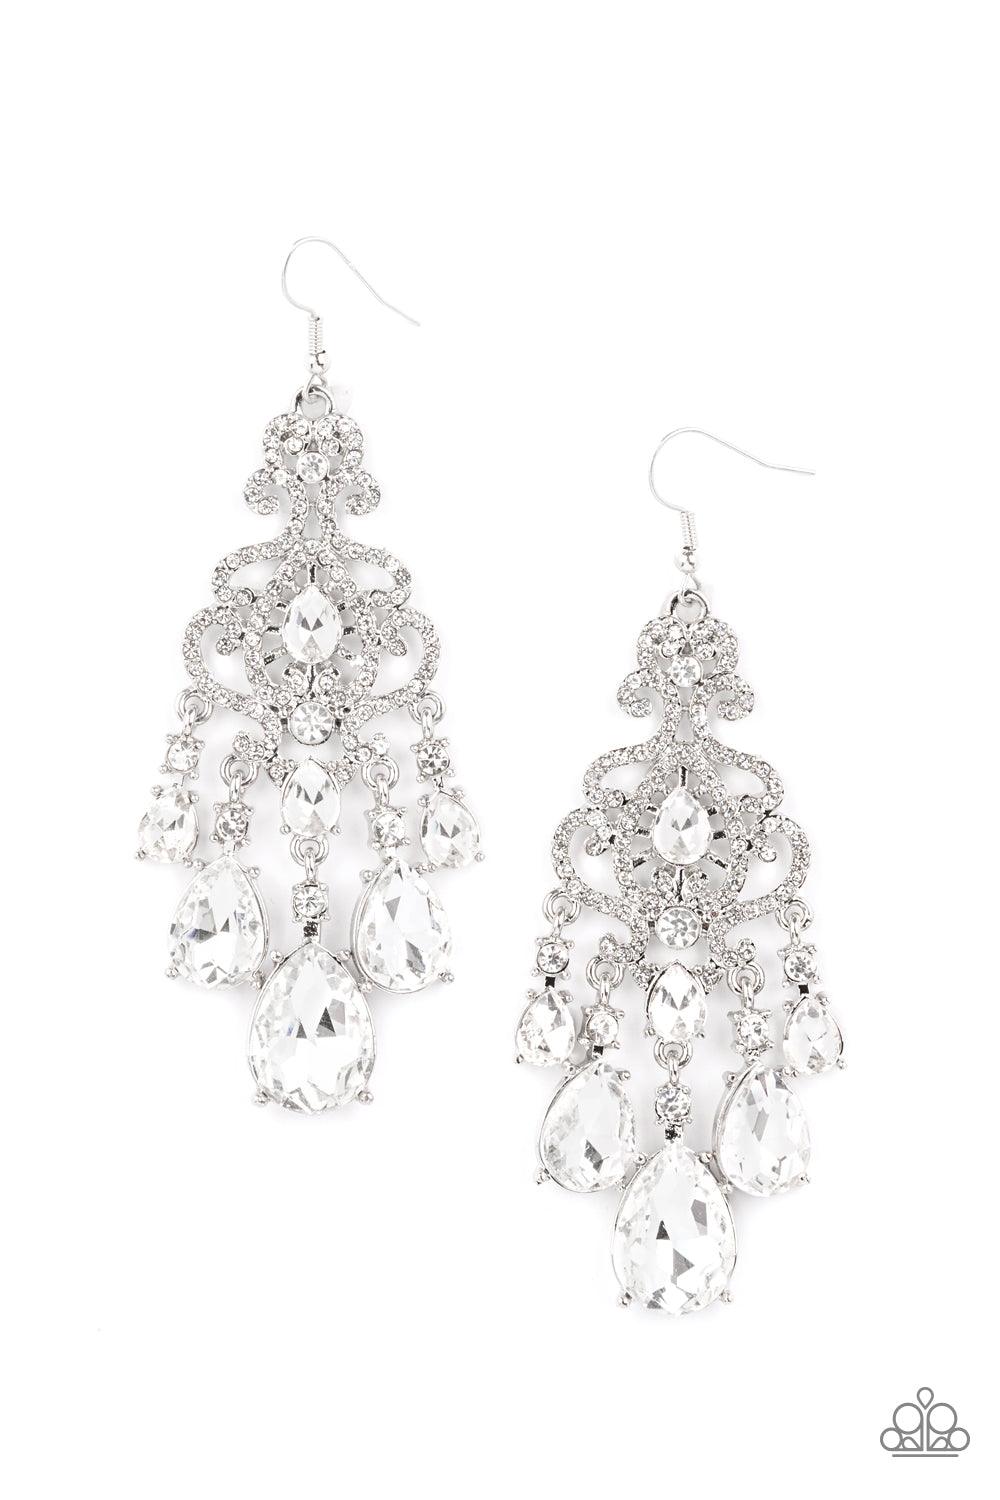 Paparazzi Accessories Queen Of All Things Sparkly - White Gradually increasing in size, glassy white teardrop gems create a dramatic fringe at the bottom of a decorative silver frame swirling with dainty white rhinestones for a timelessly over-the-top spa